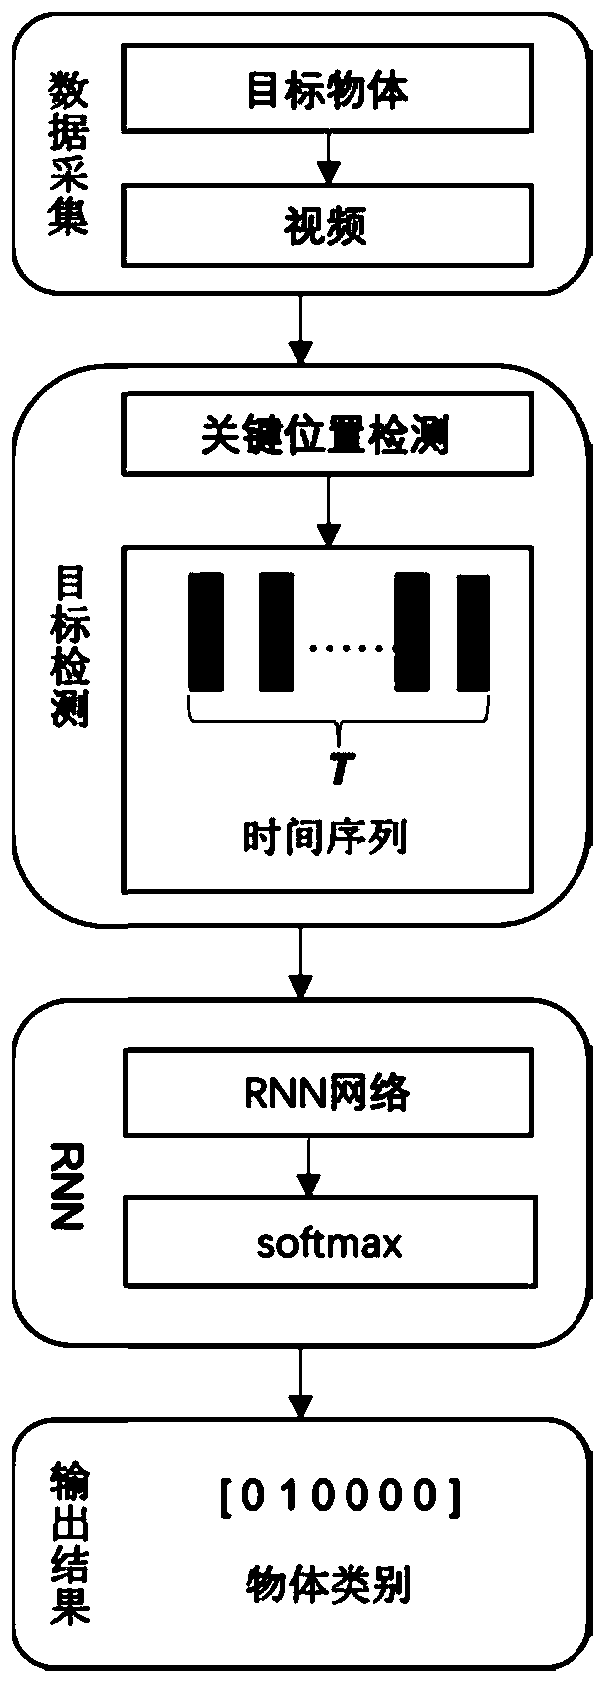 Long object identification method and identification system based on target detection and RNN